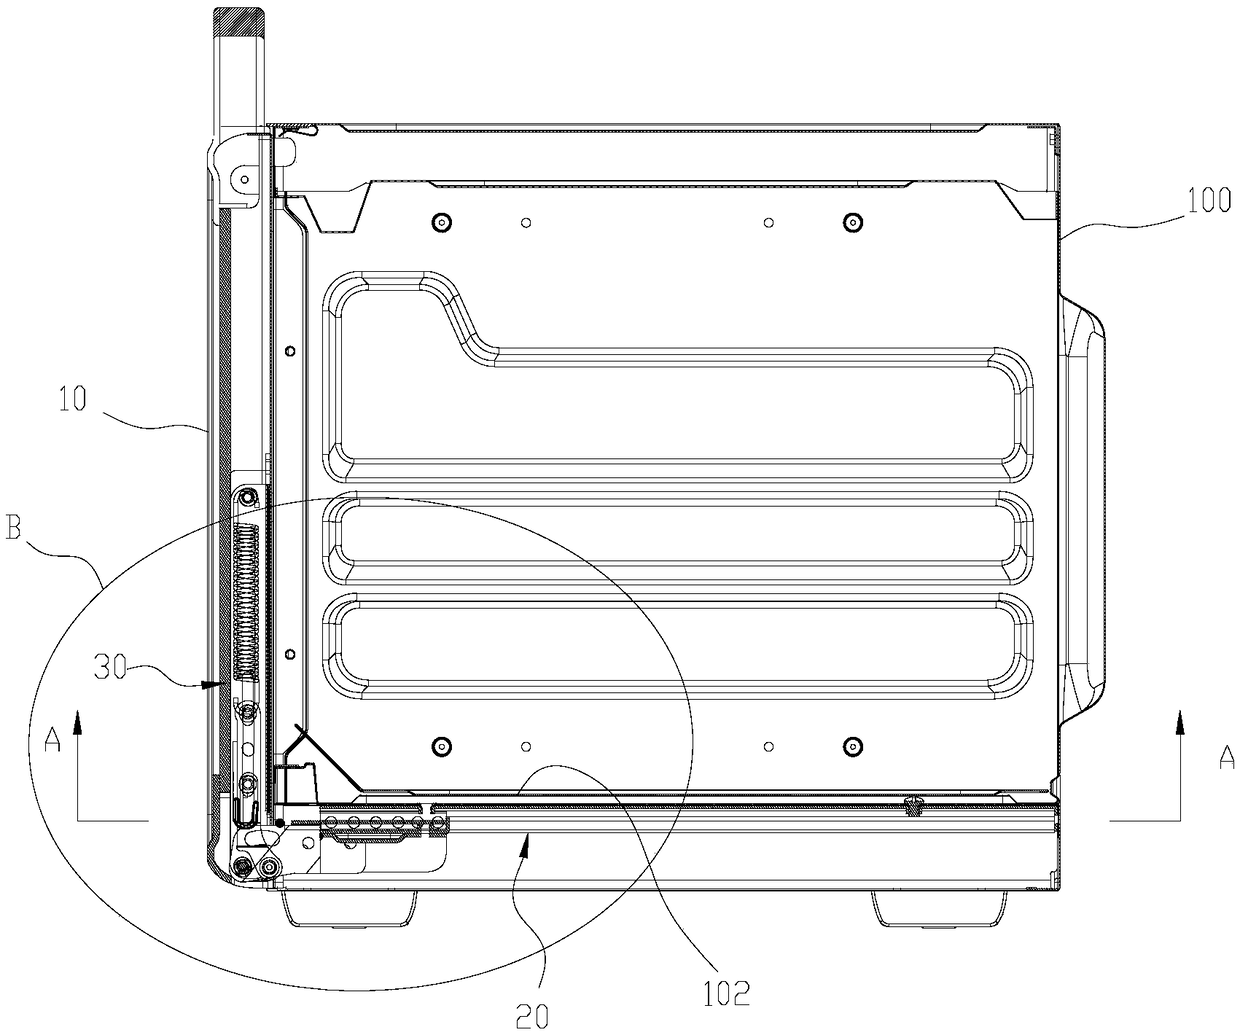 Sliding door mechanism used for electric oven and electric oven